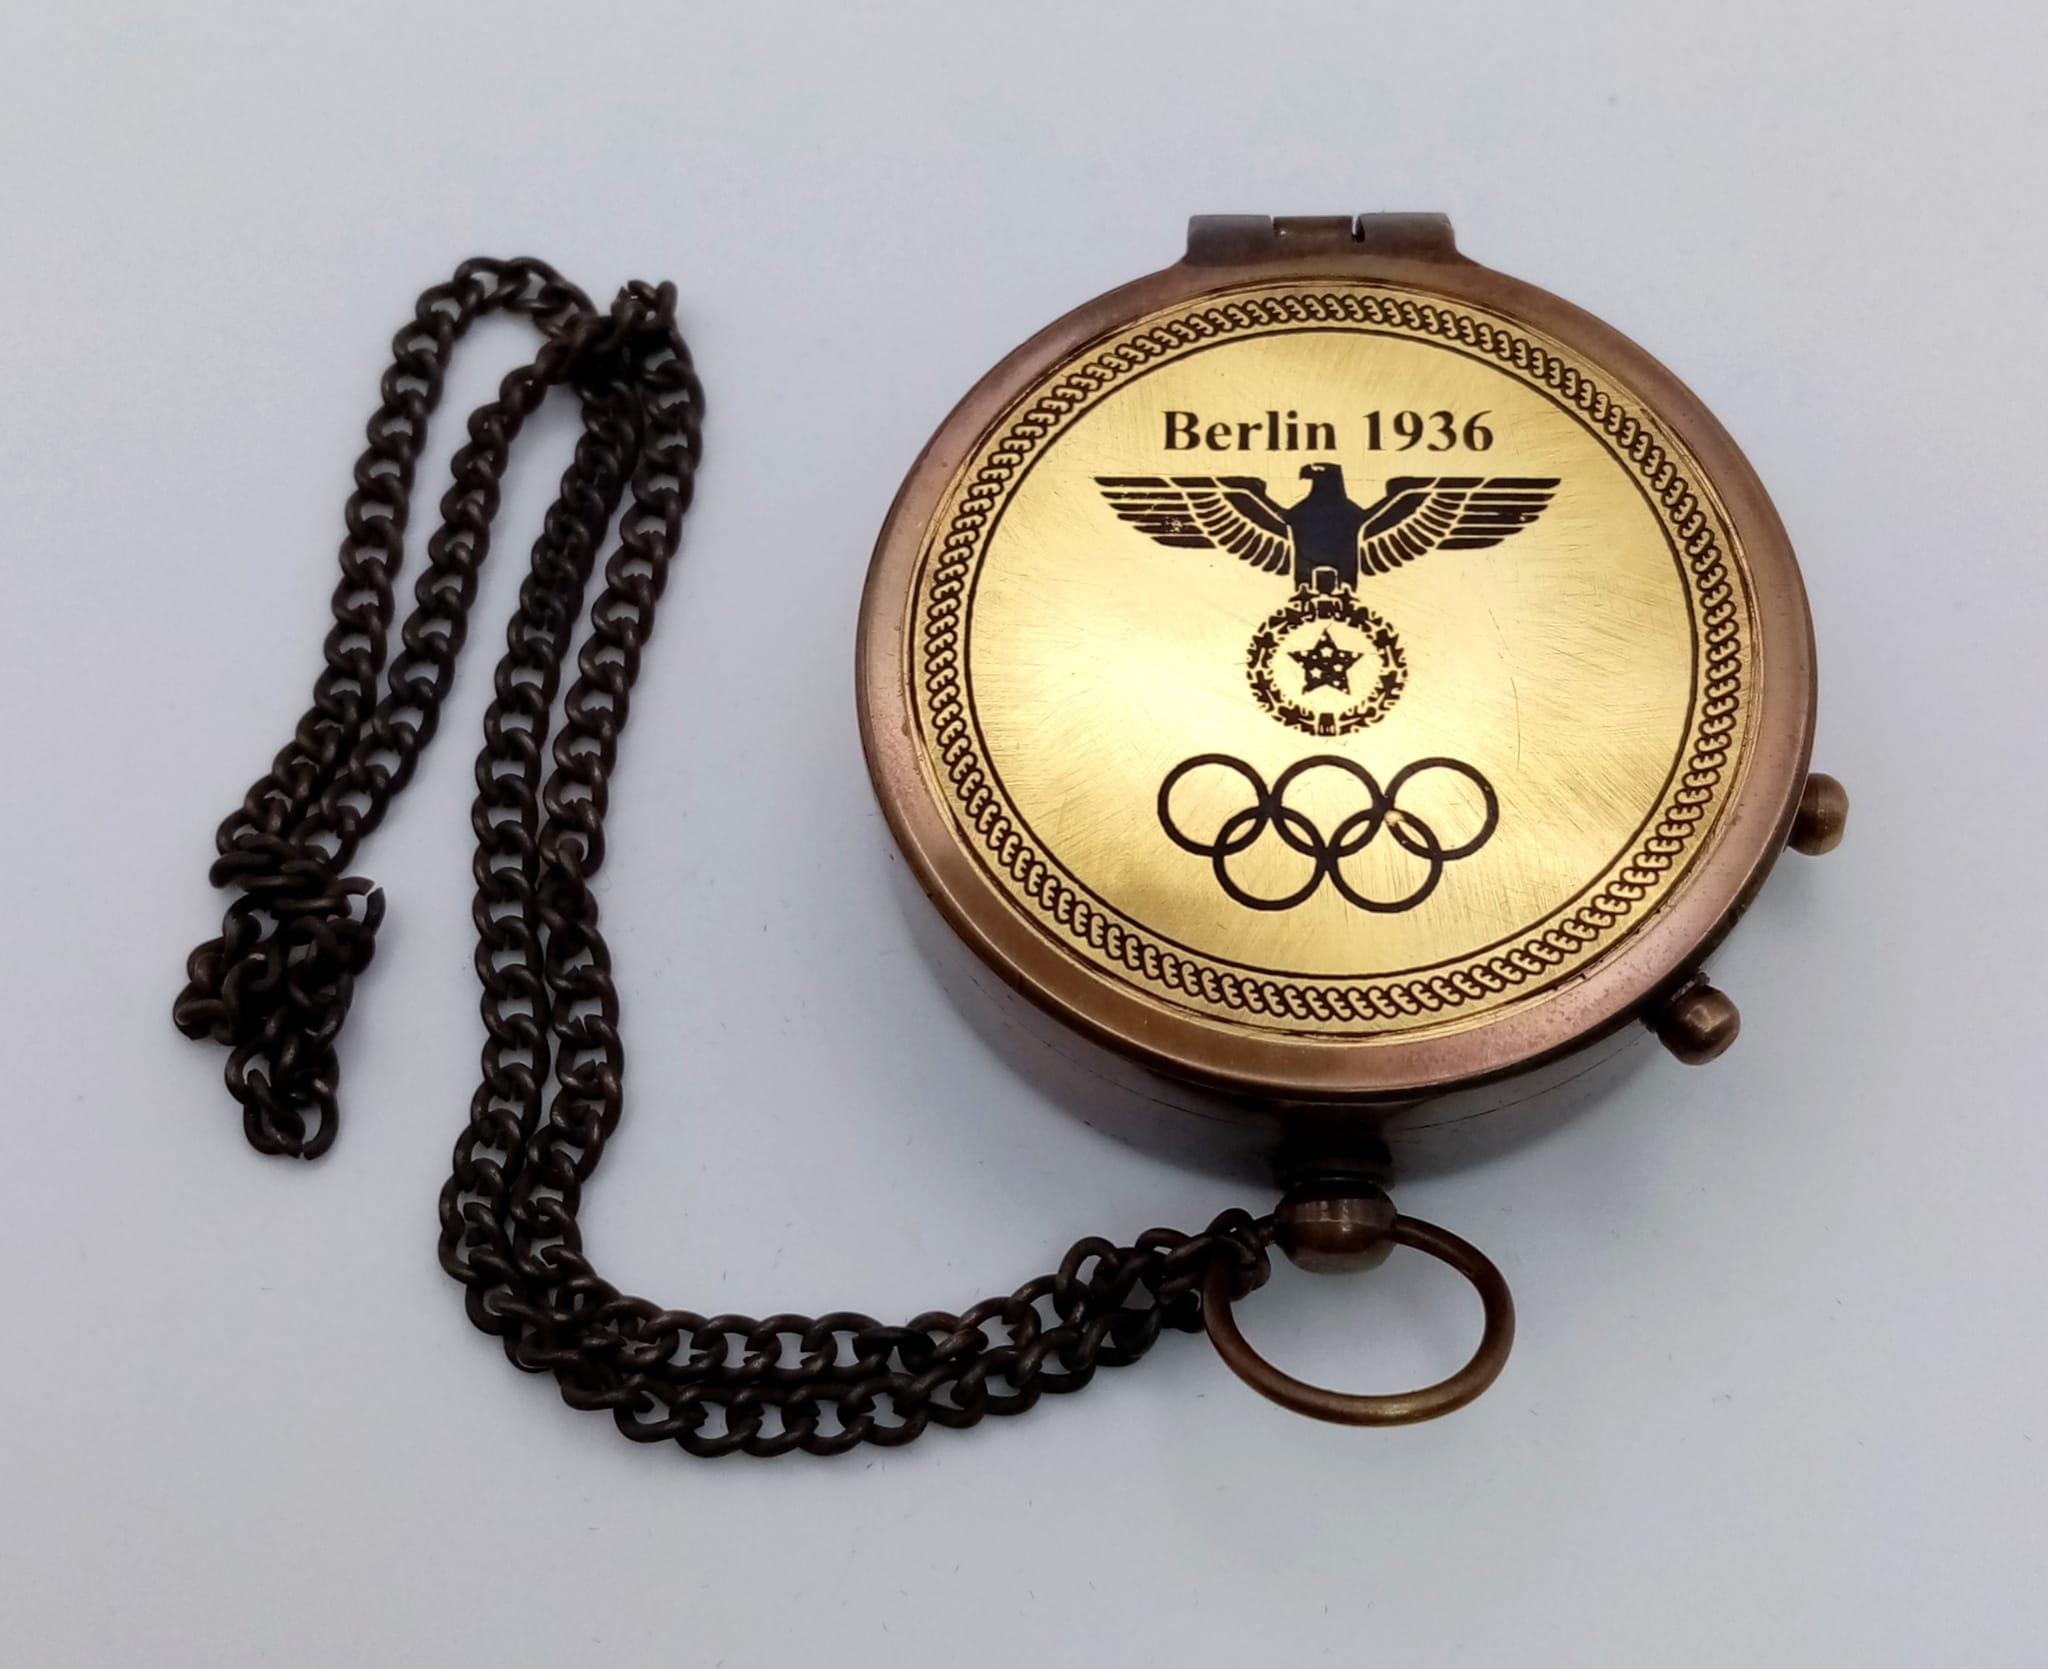 A brass compass with immobiliser, brass chain and inscription BERLIN 1936 in a wooden box with - Image 2 of 6